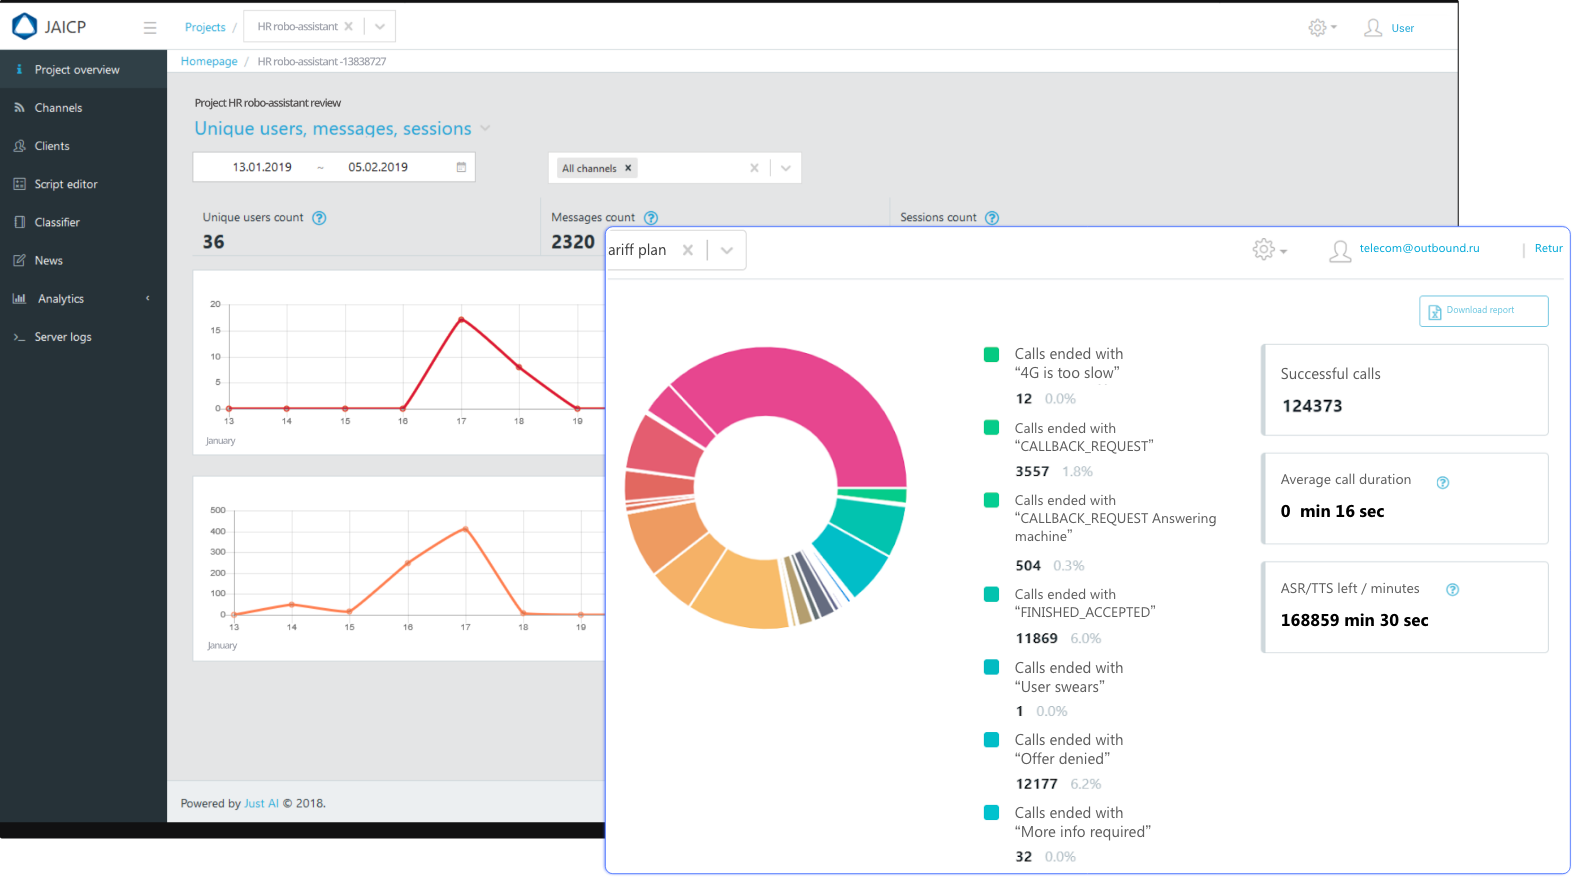 State-of-the-art analytics and reporting to monitor the project performance